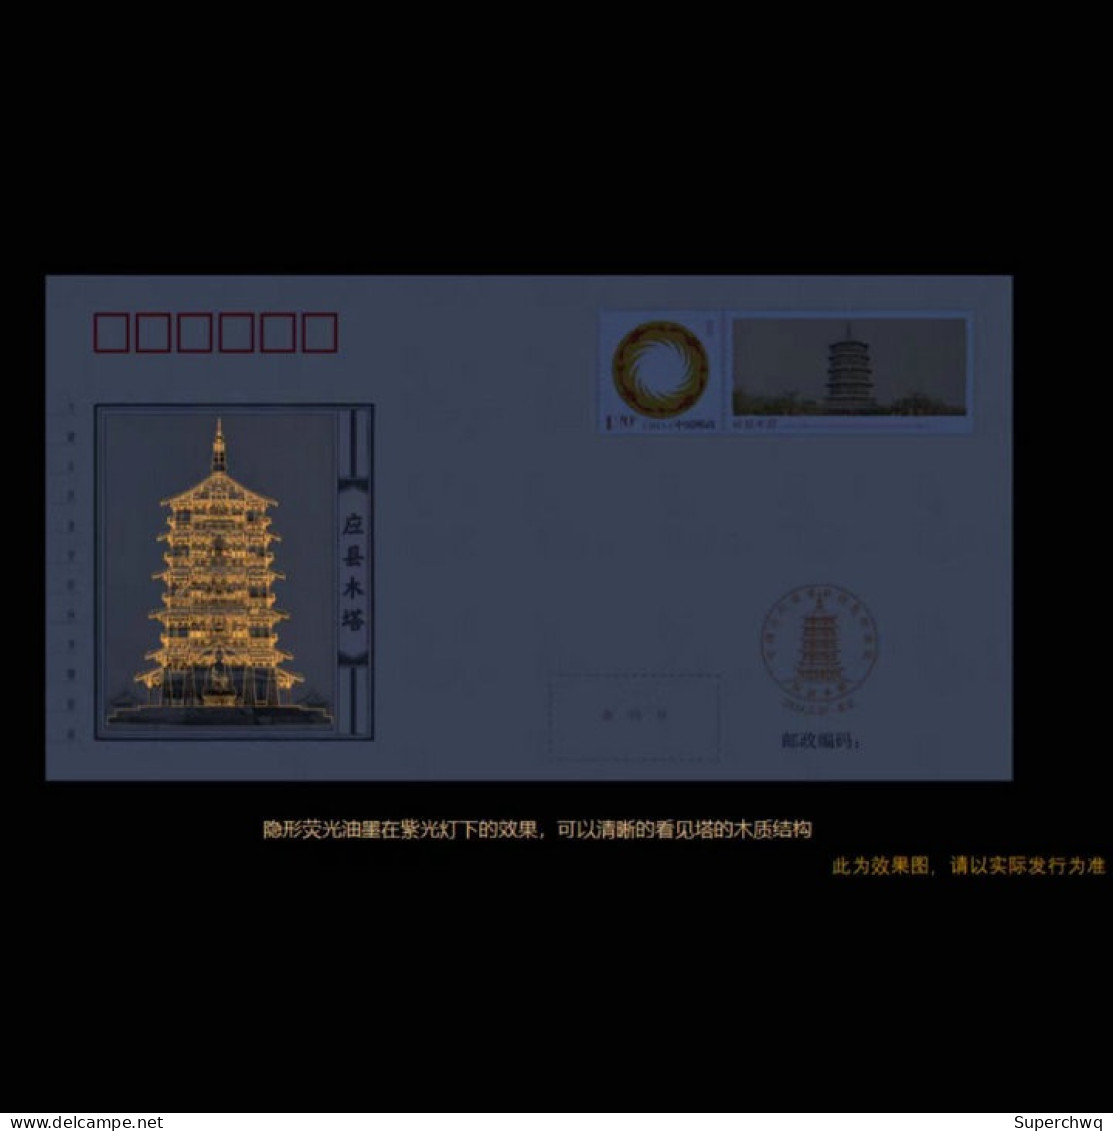 China Cover The Commemorative Cover Of "Qiaosi Tiangong - Important Scientific And Technological Inventions And Creation - Briefe U. Dokumente